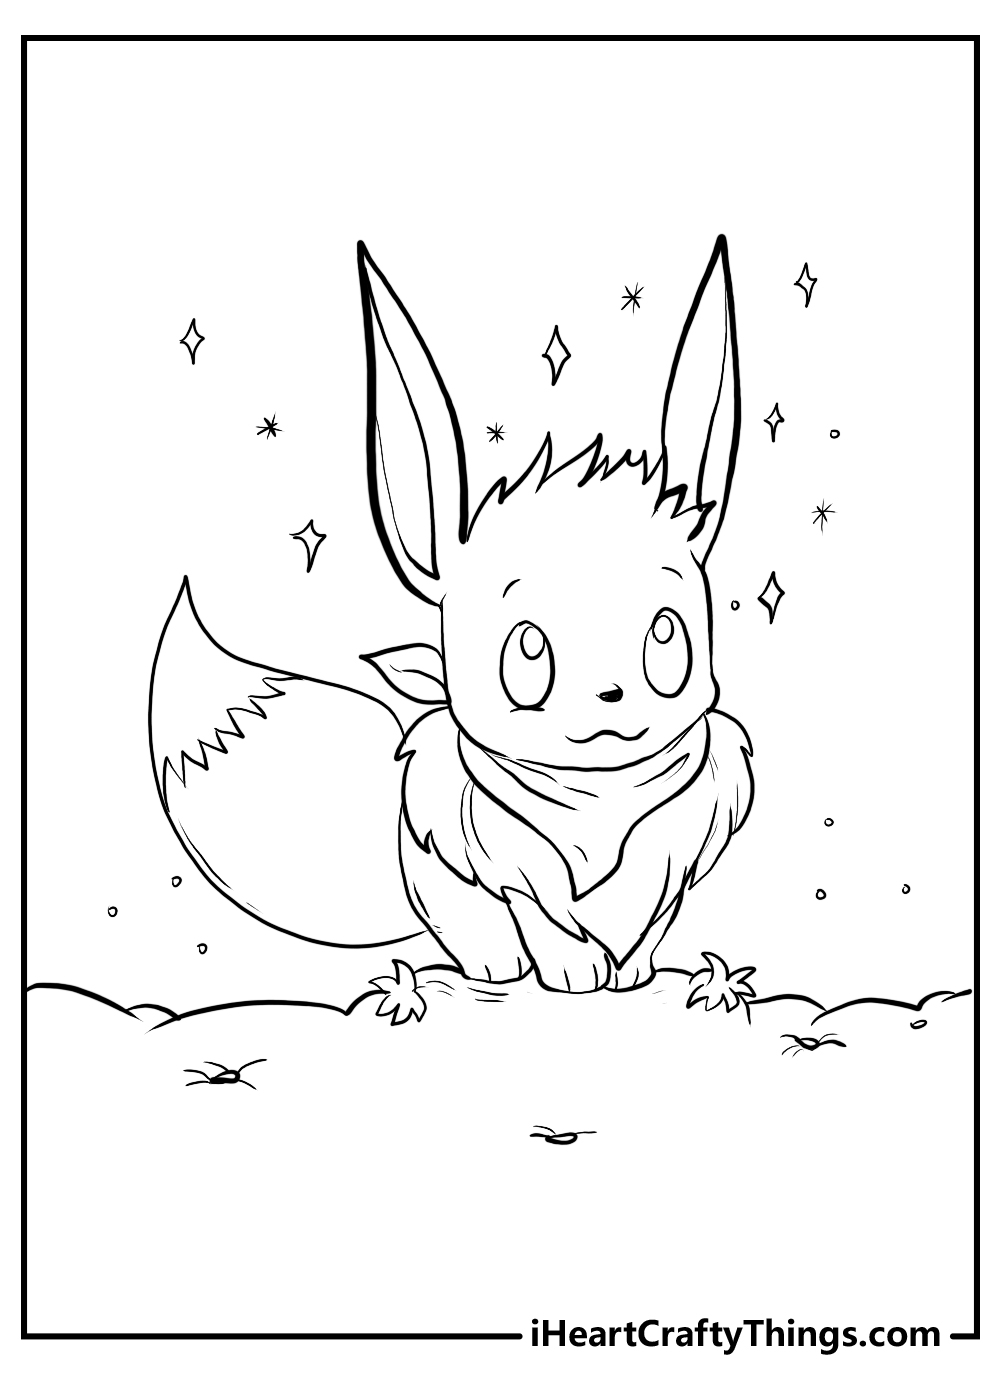 Eevee Pokémon Coloring Pages for Kids